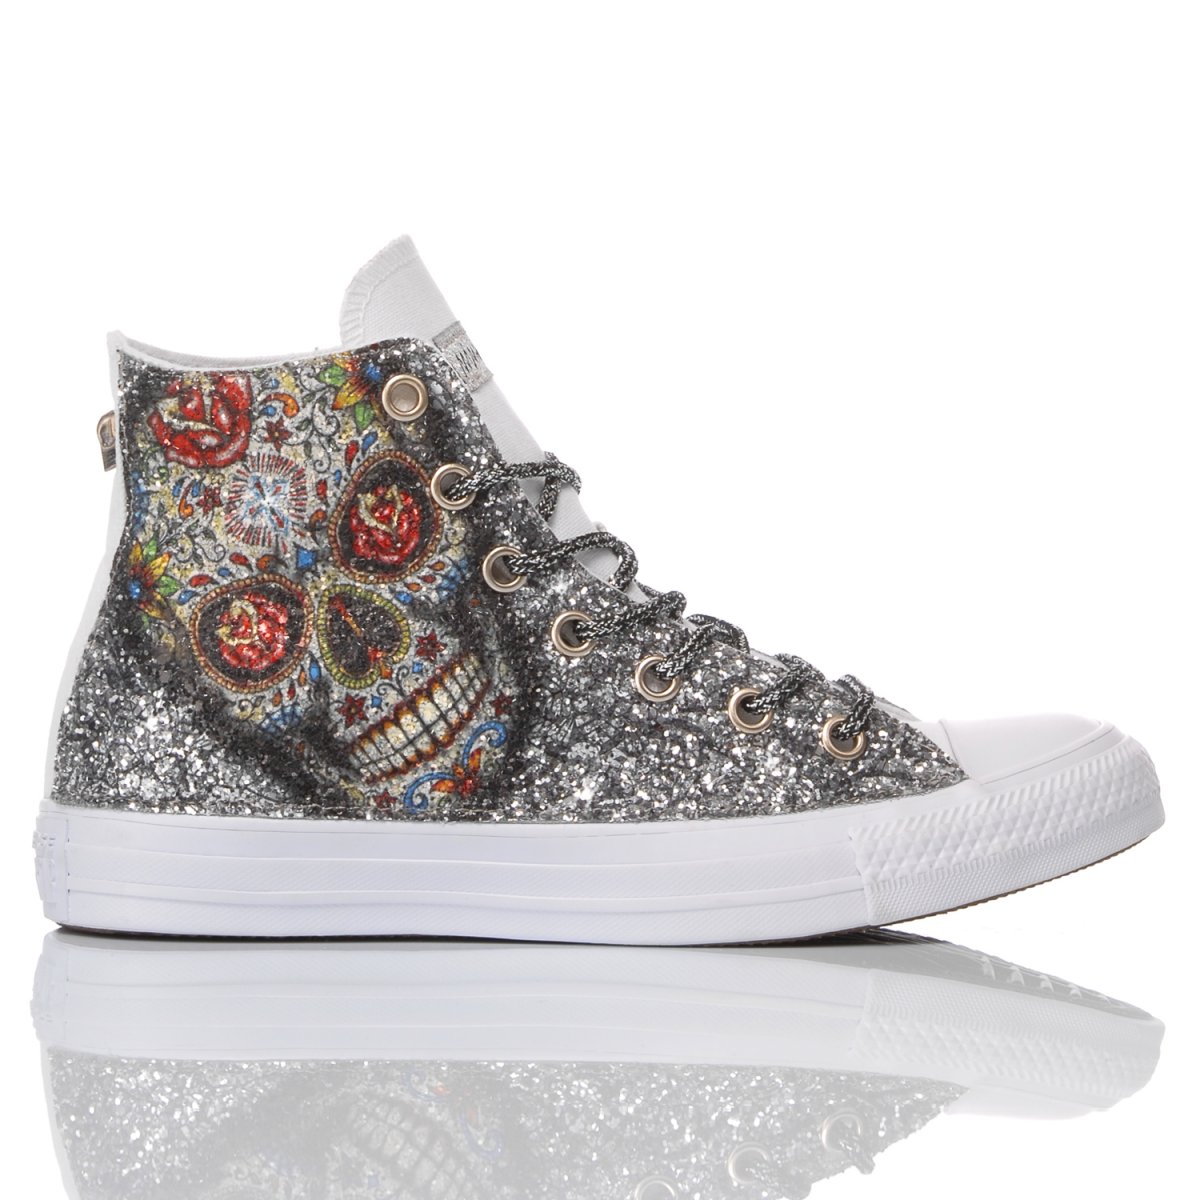 converse with skulls